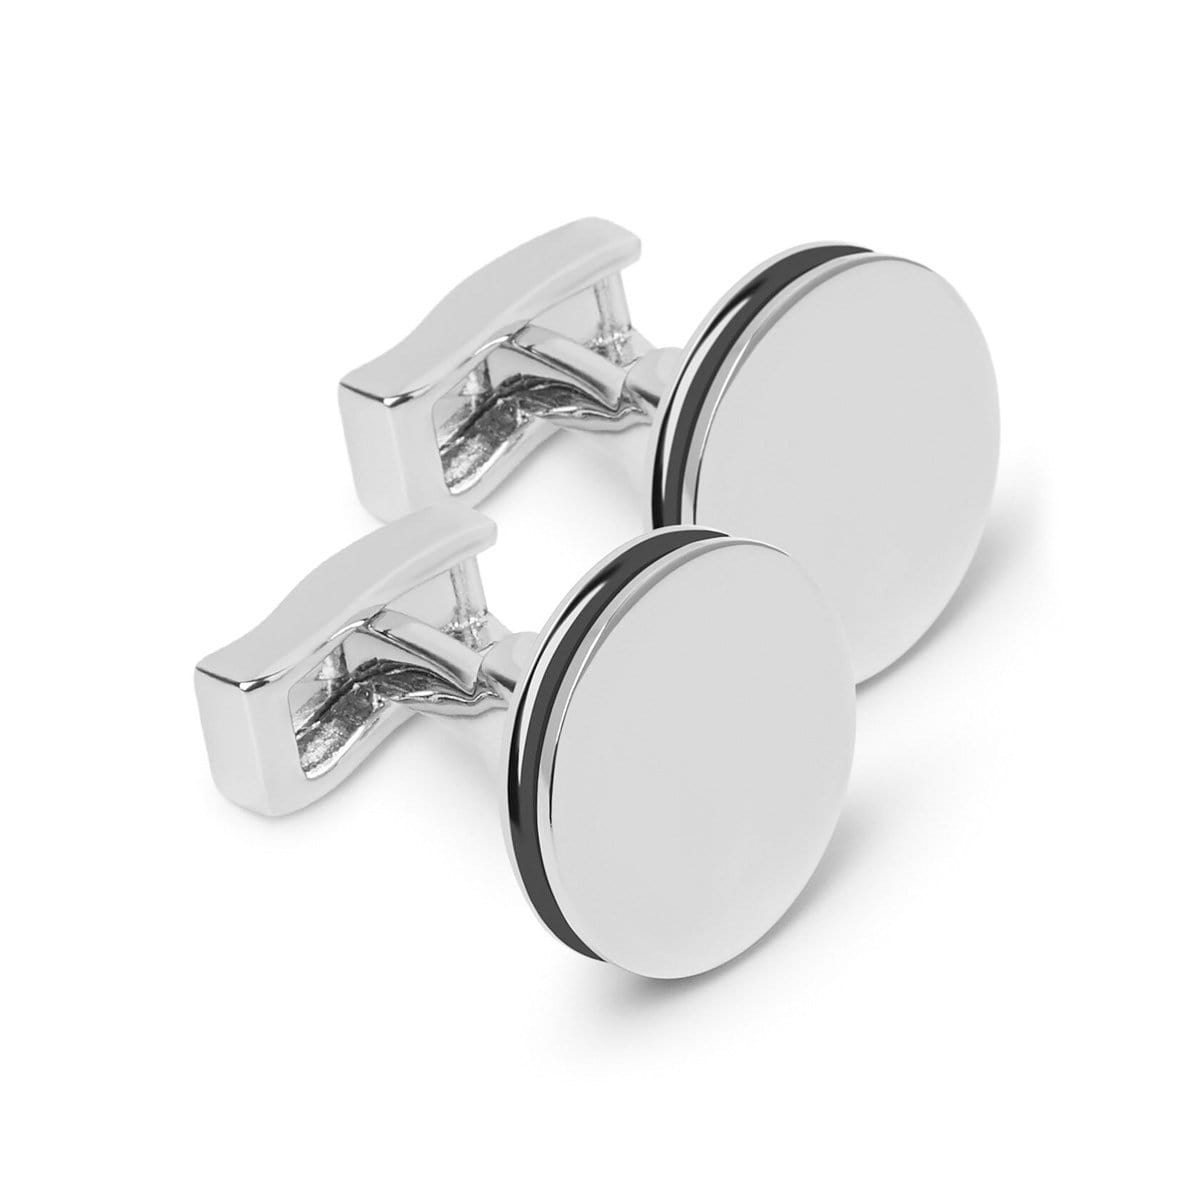 T.M.Lewin-Edged-Circle-Cufflink-Silver-and-Black-71913-009